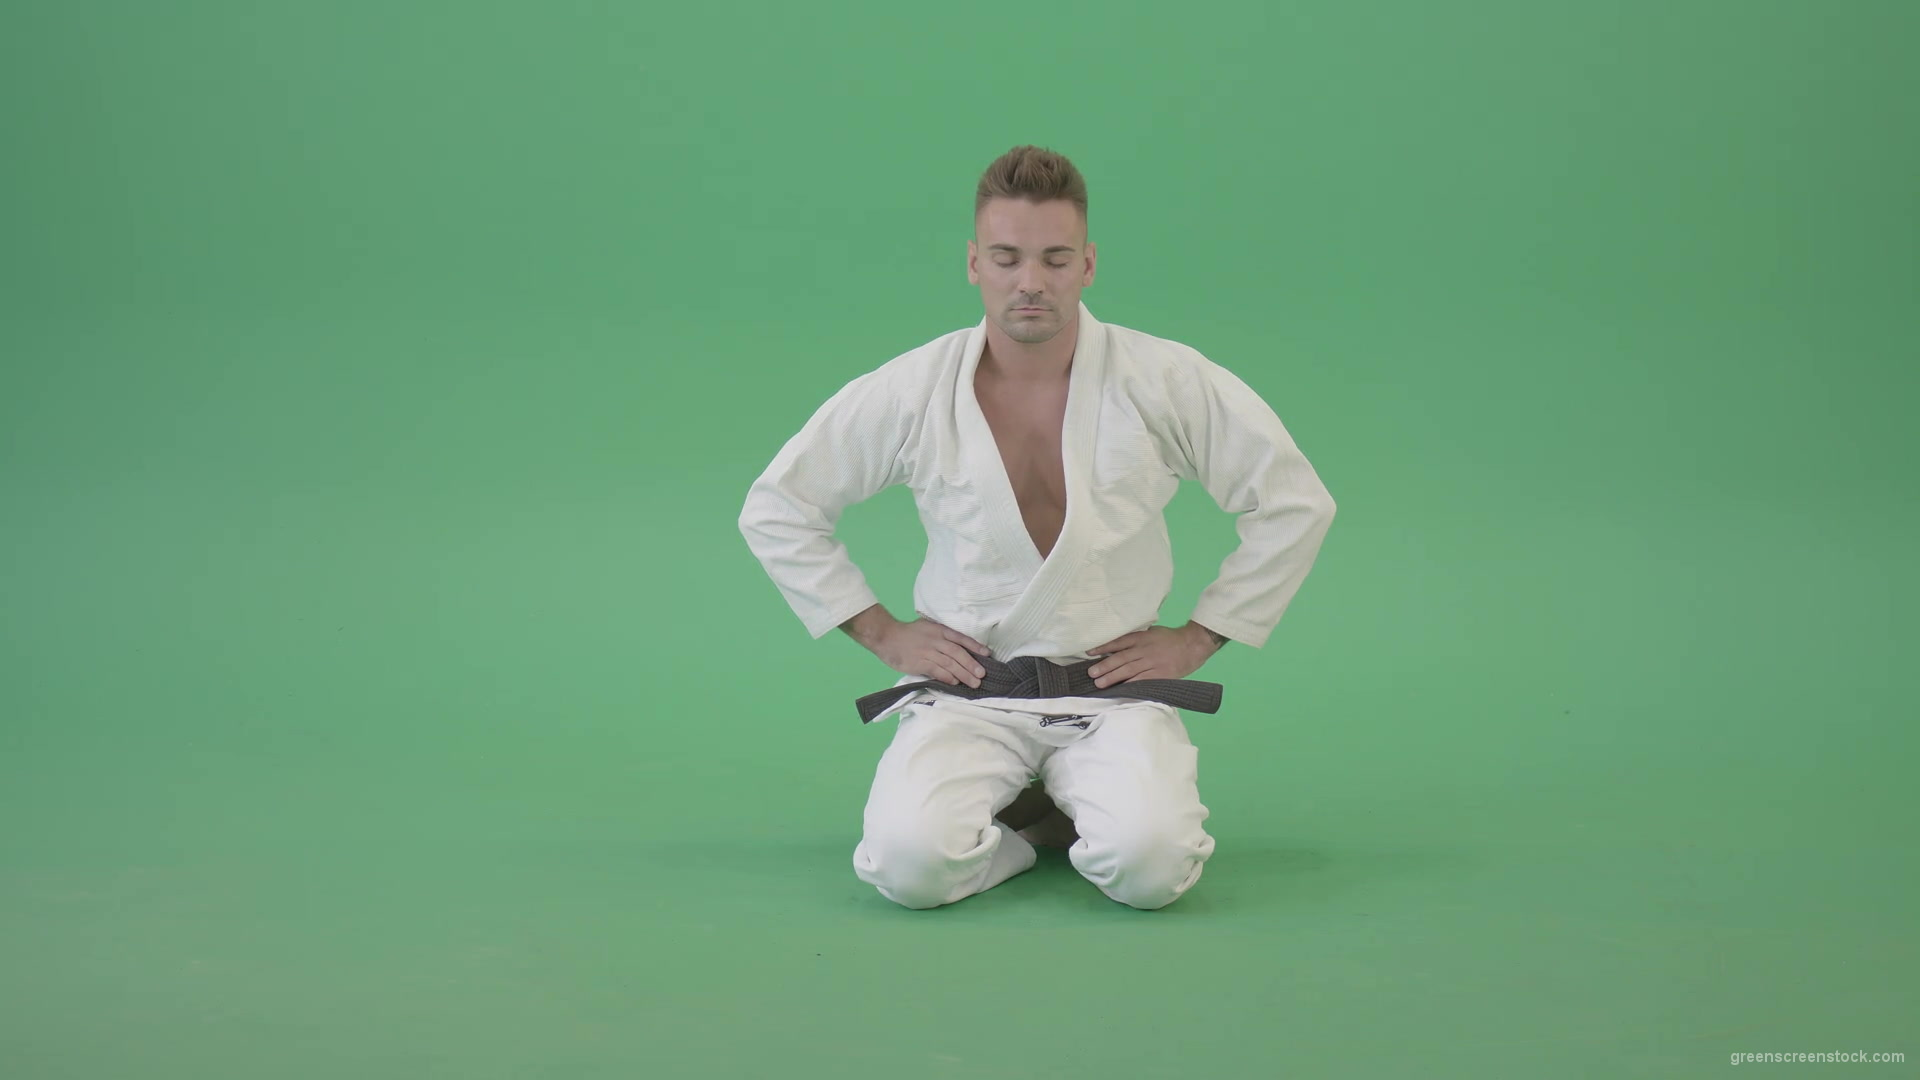 vj video background Jujutsu-Sport-man-meditating-and-breathing-slowly-isolated-on-green-screen-4K-Video-Footage-1920_003